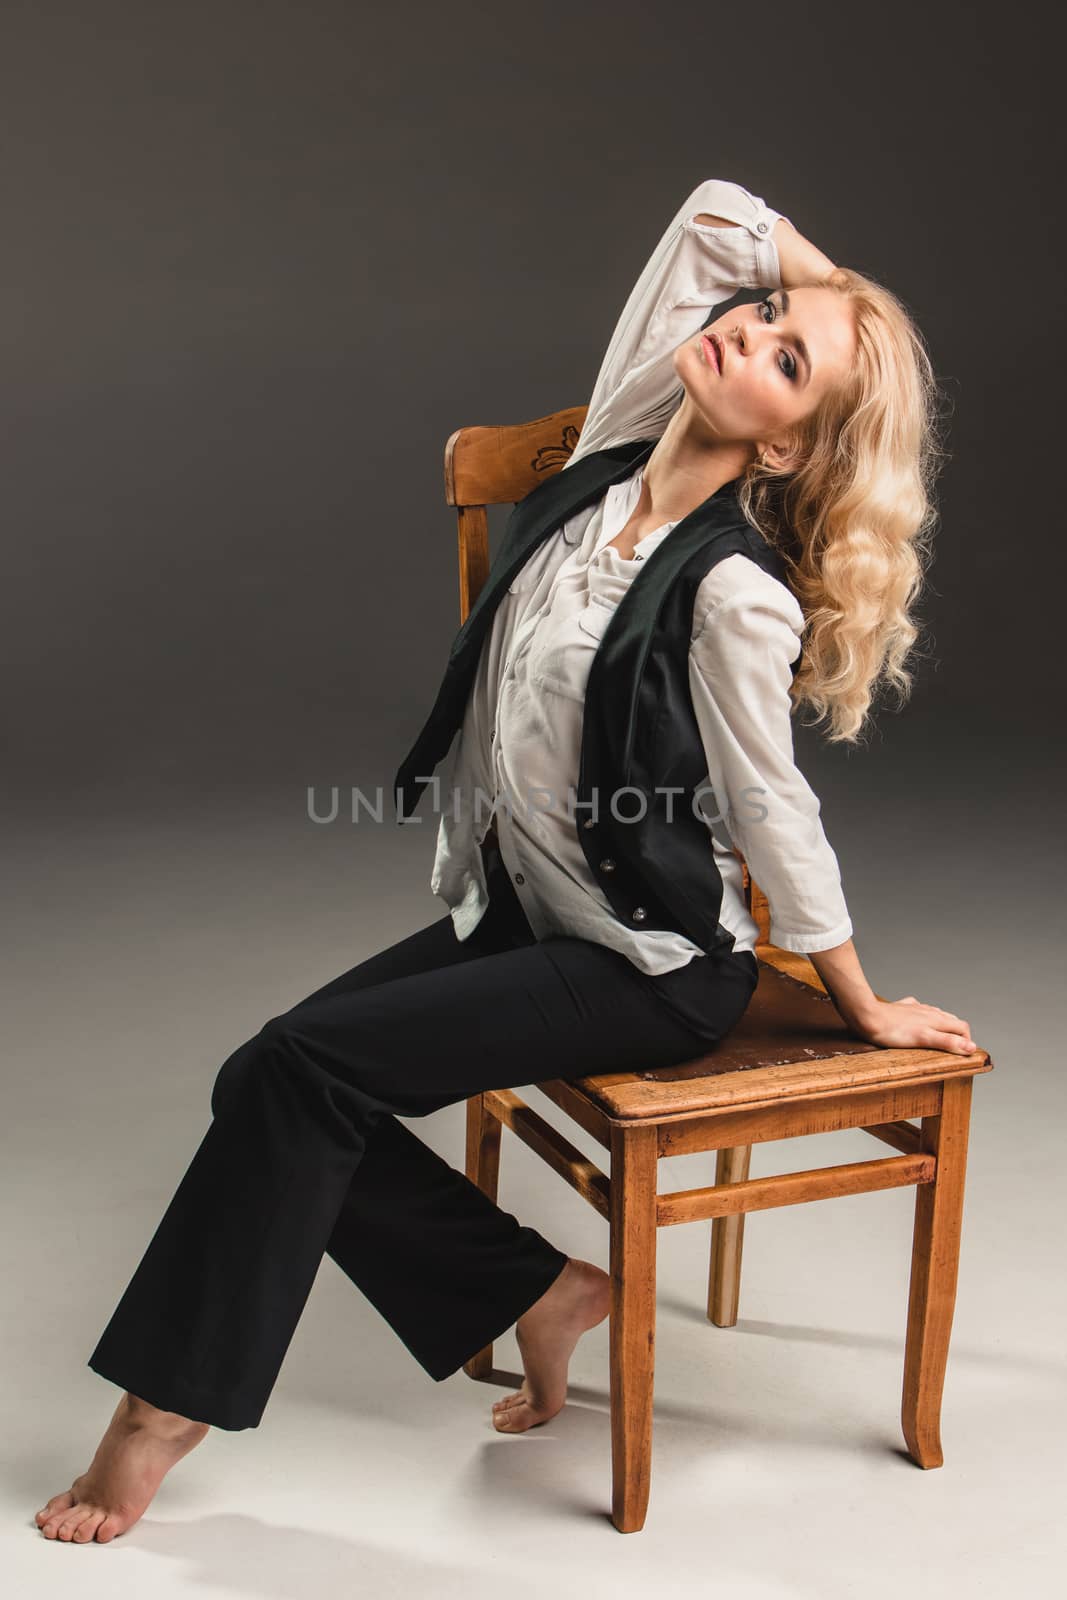 Beauty blond woman  in a black suit on chair on a gray background